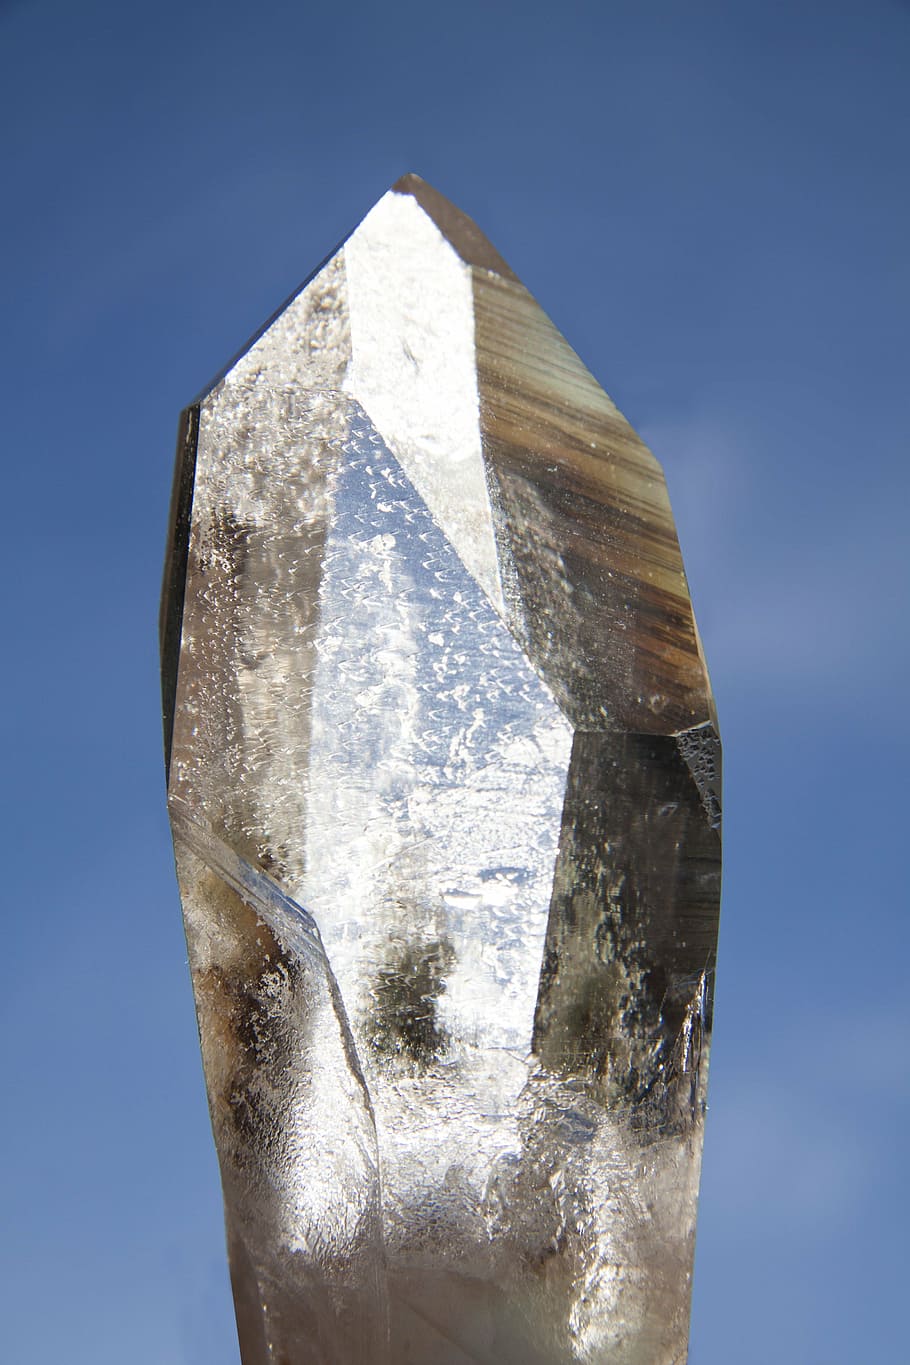 gray mineral stone, pure quartz, rock crystal, mineral, trigonal, prism surfaces, silicon dioxide, transparent, clear, back light